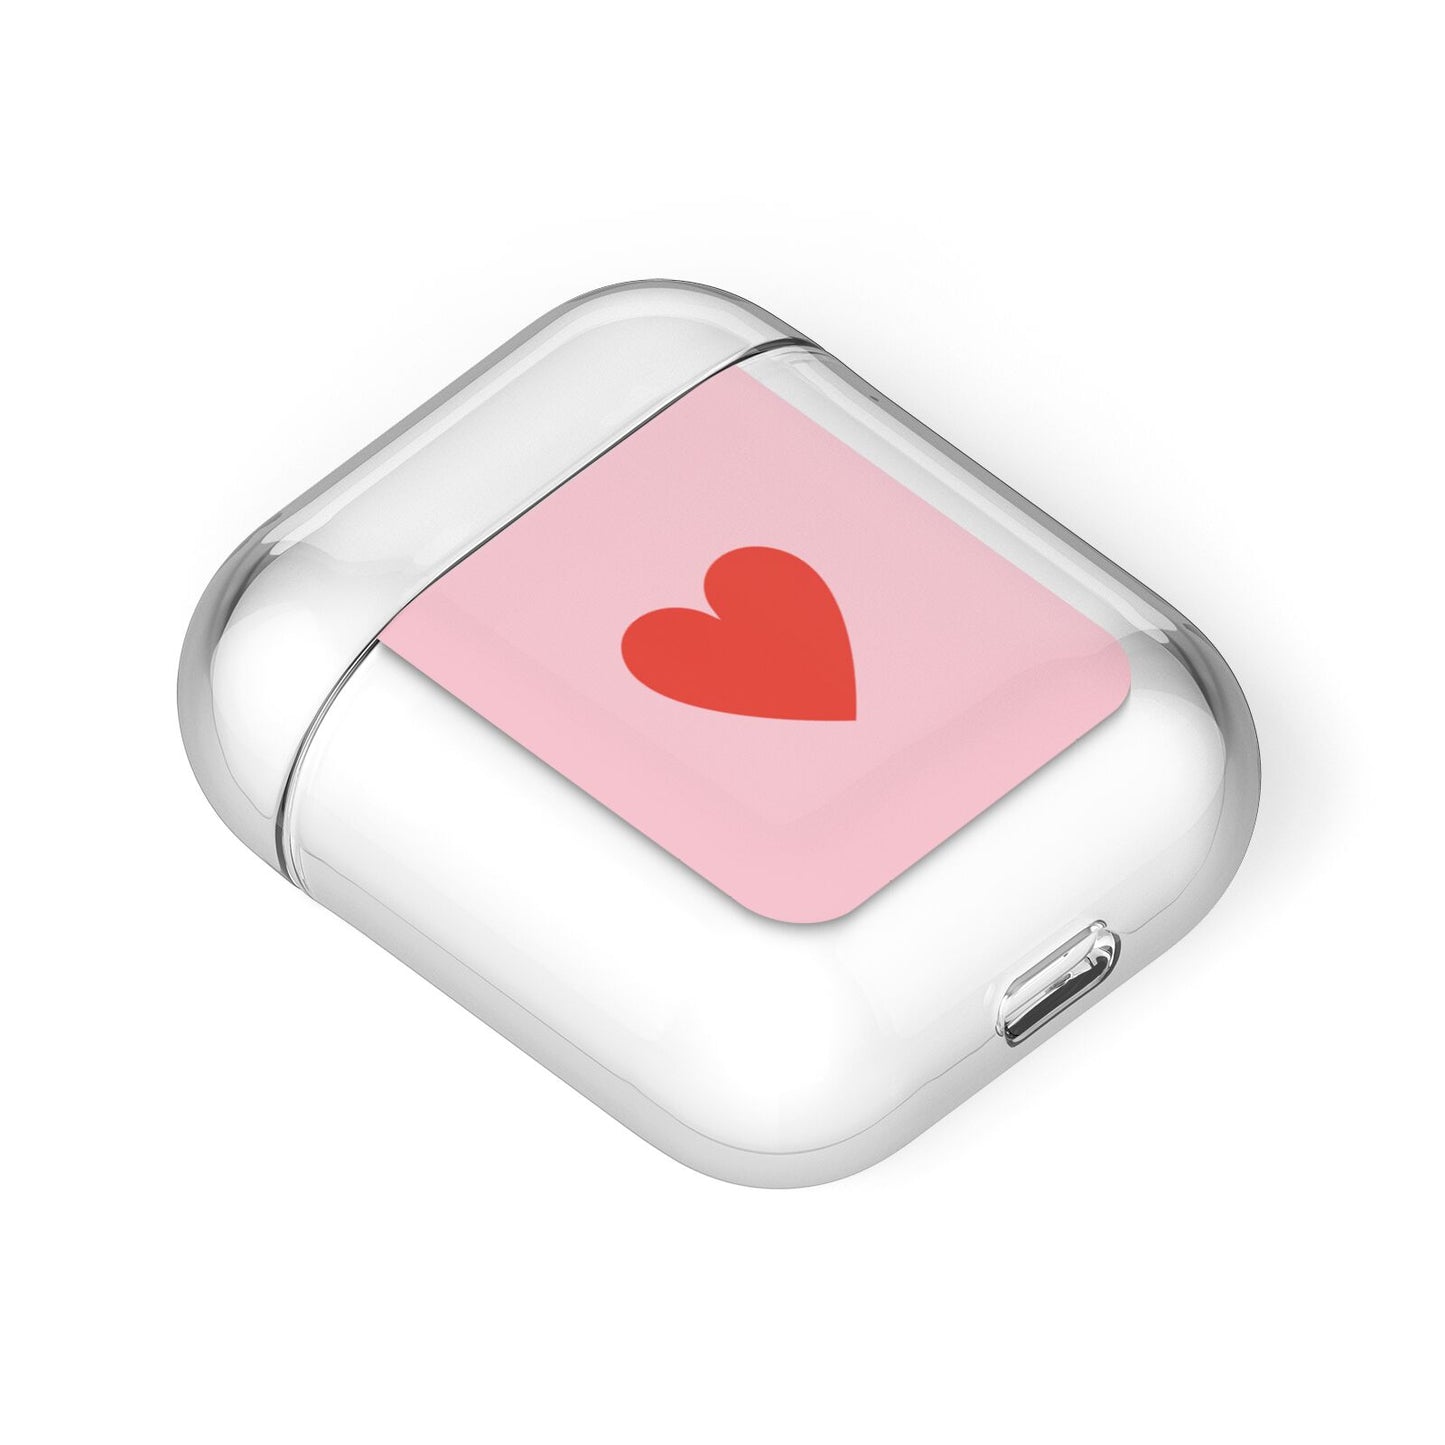 Red Heart AirPods Case Laid Flat